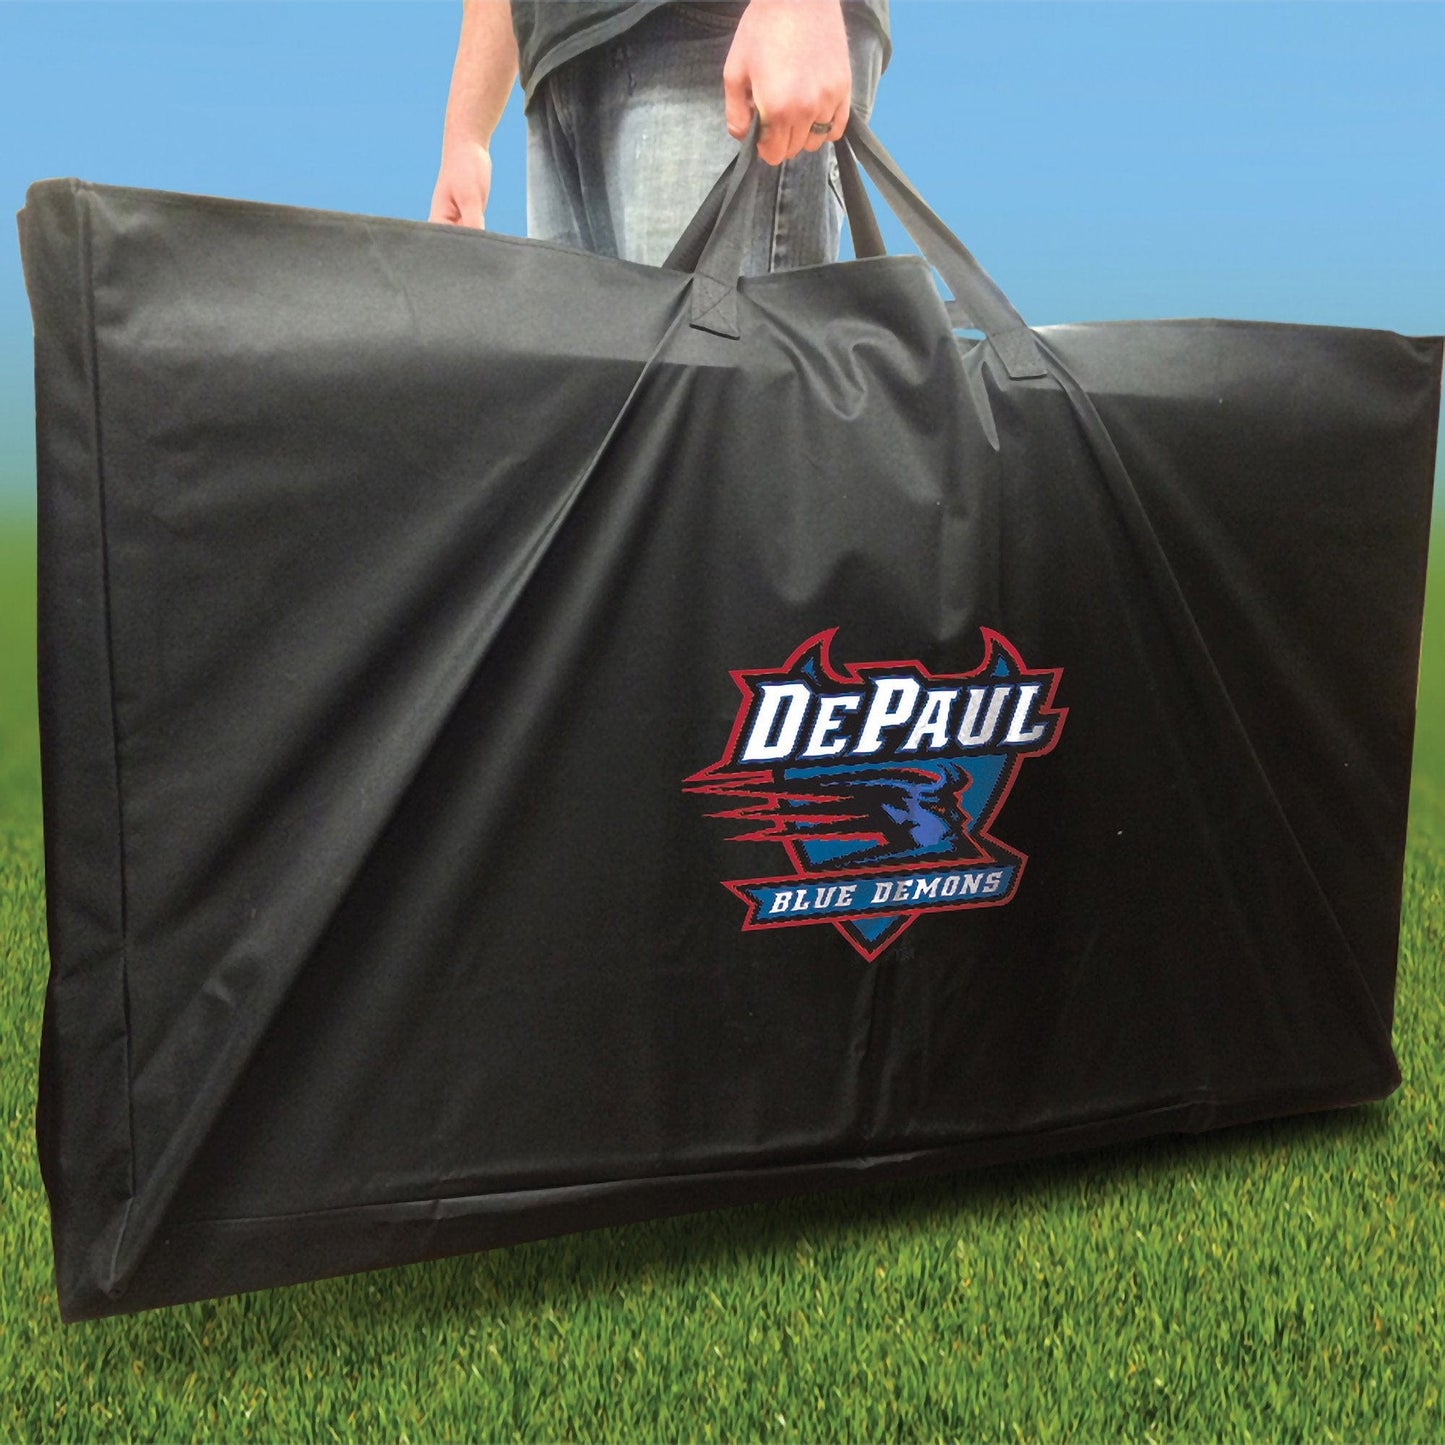 DePaul Stained Pyramid team logo carry case